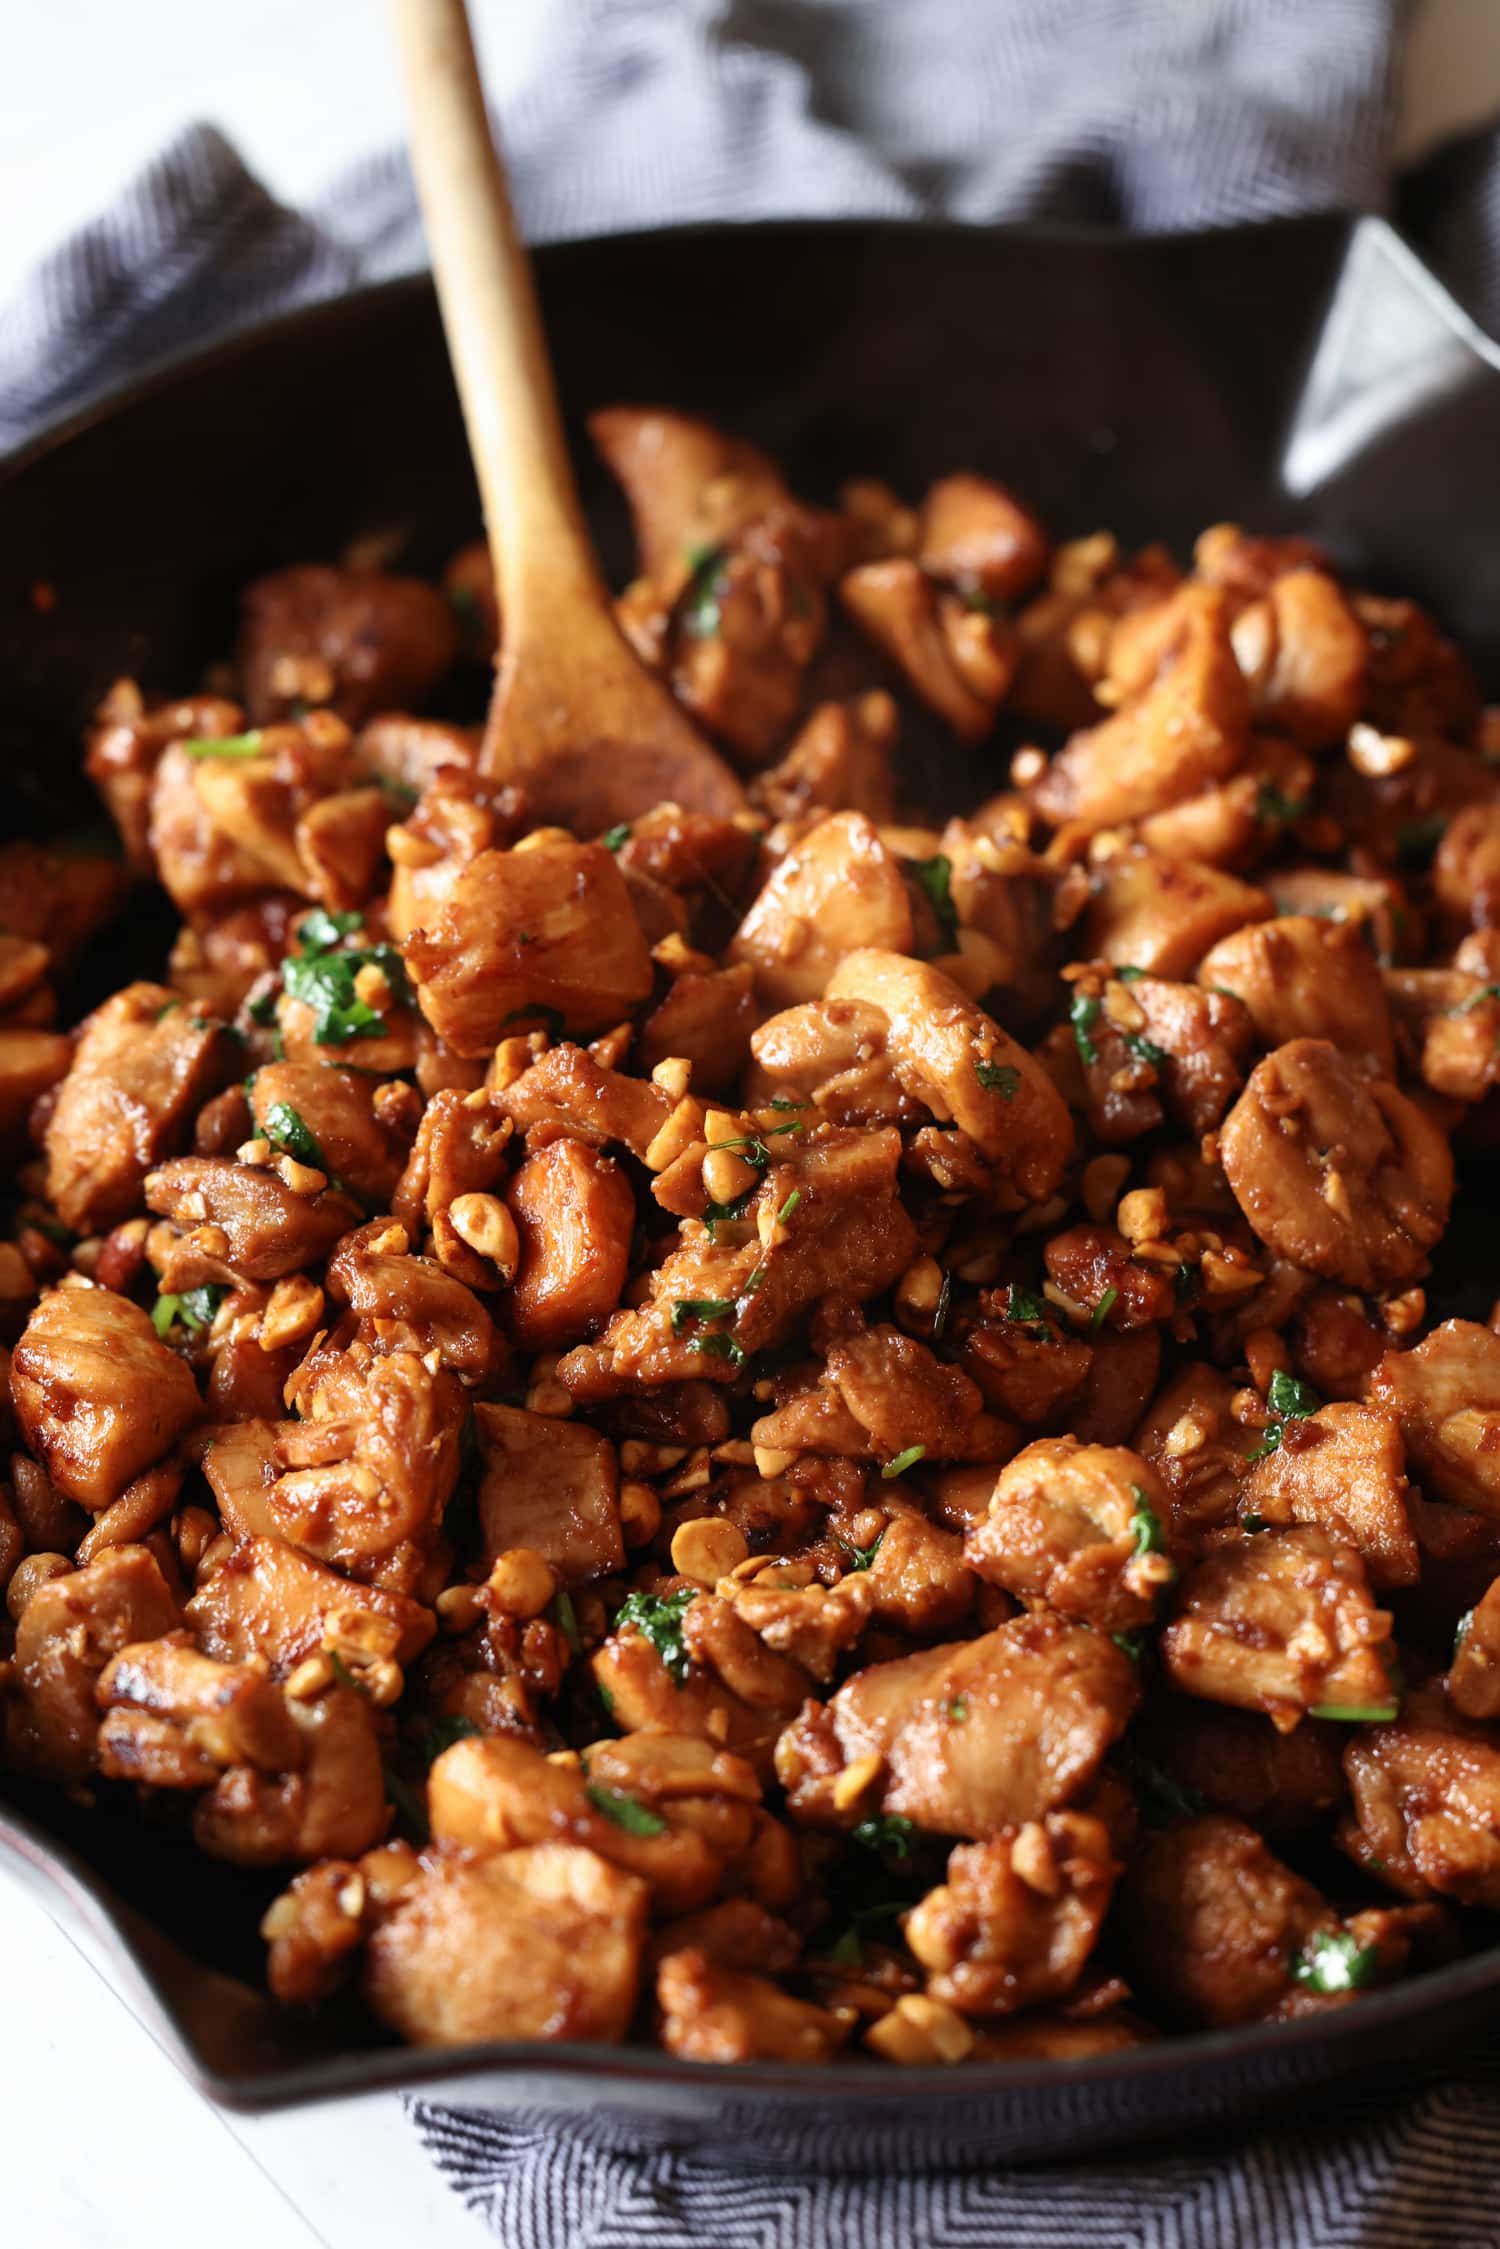 Ginger chicken is stirred with a wooden spoon while cooking in a cast iron skillet.